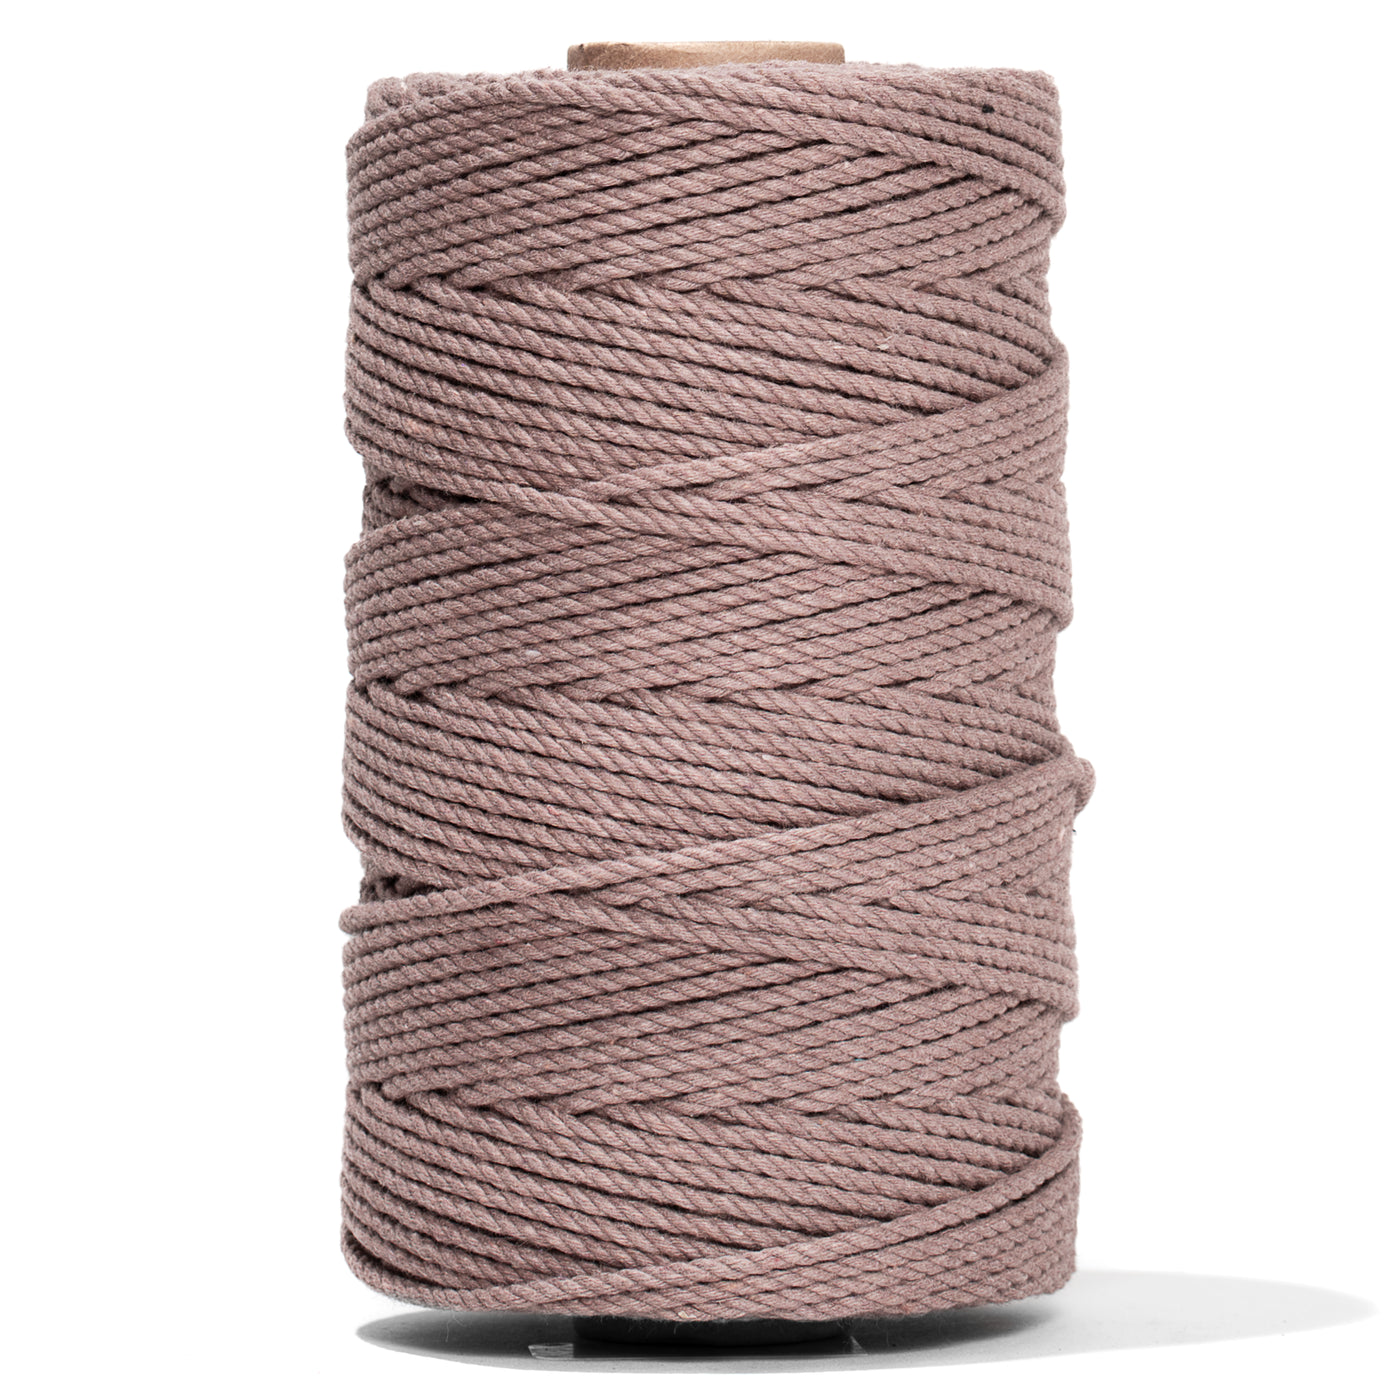 COTTON ROPE ZERO WASTE 2 MM - 3 PLY - MINK COLOR